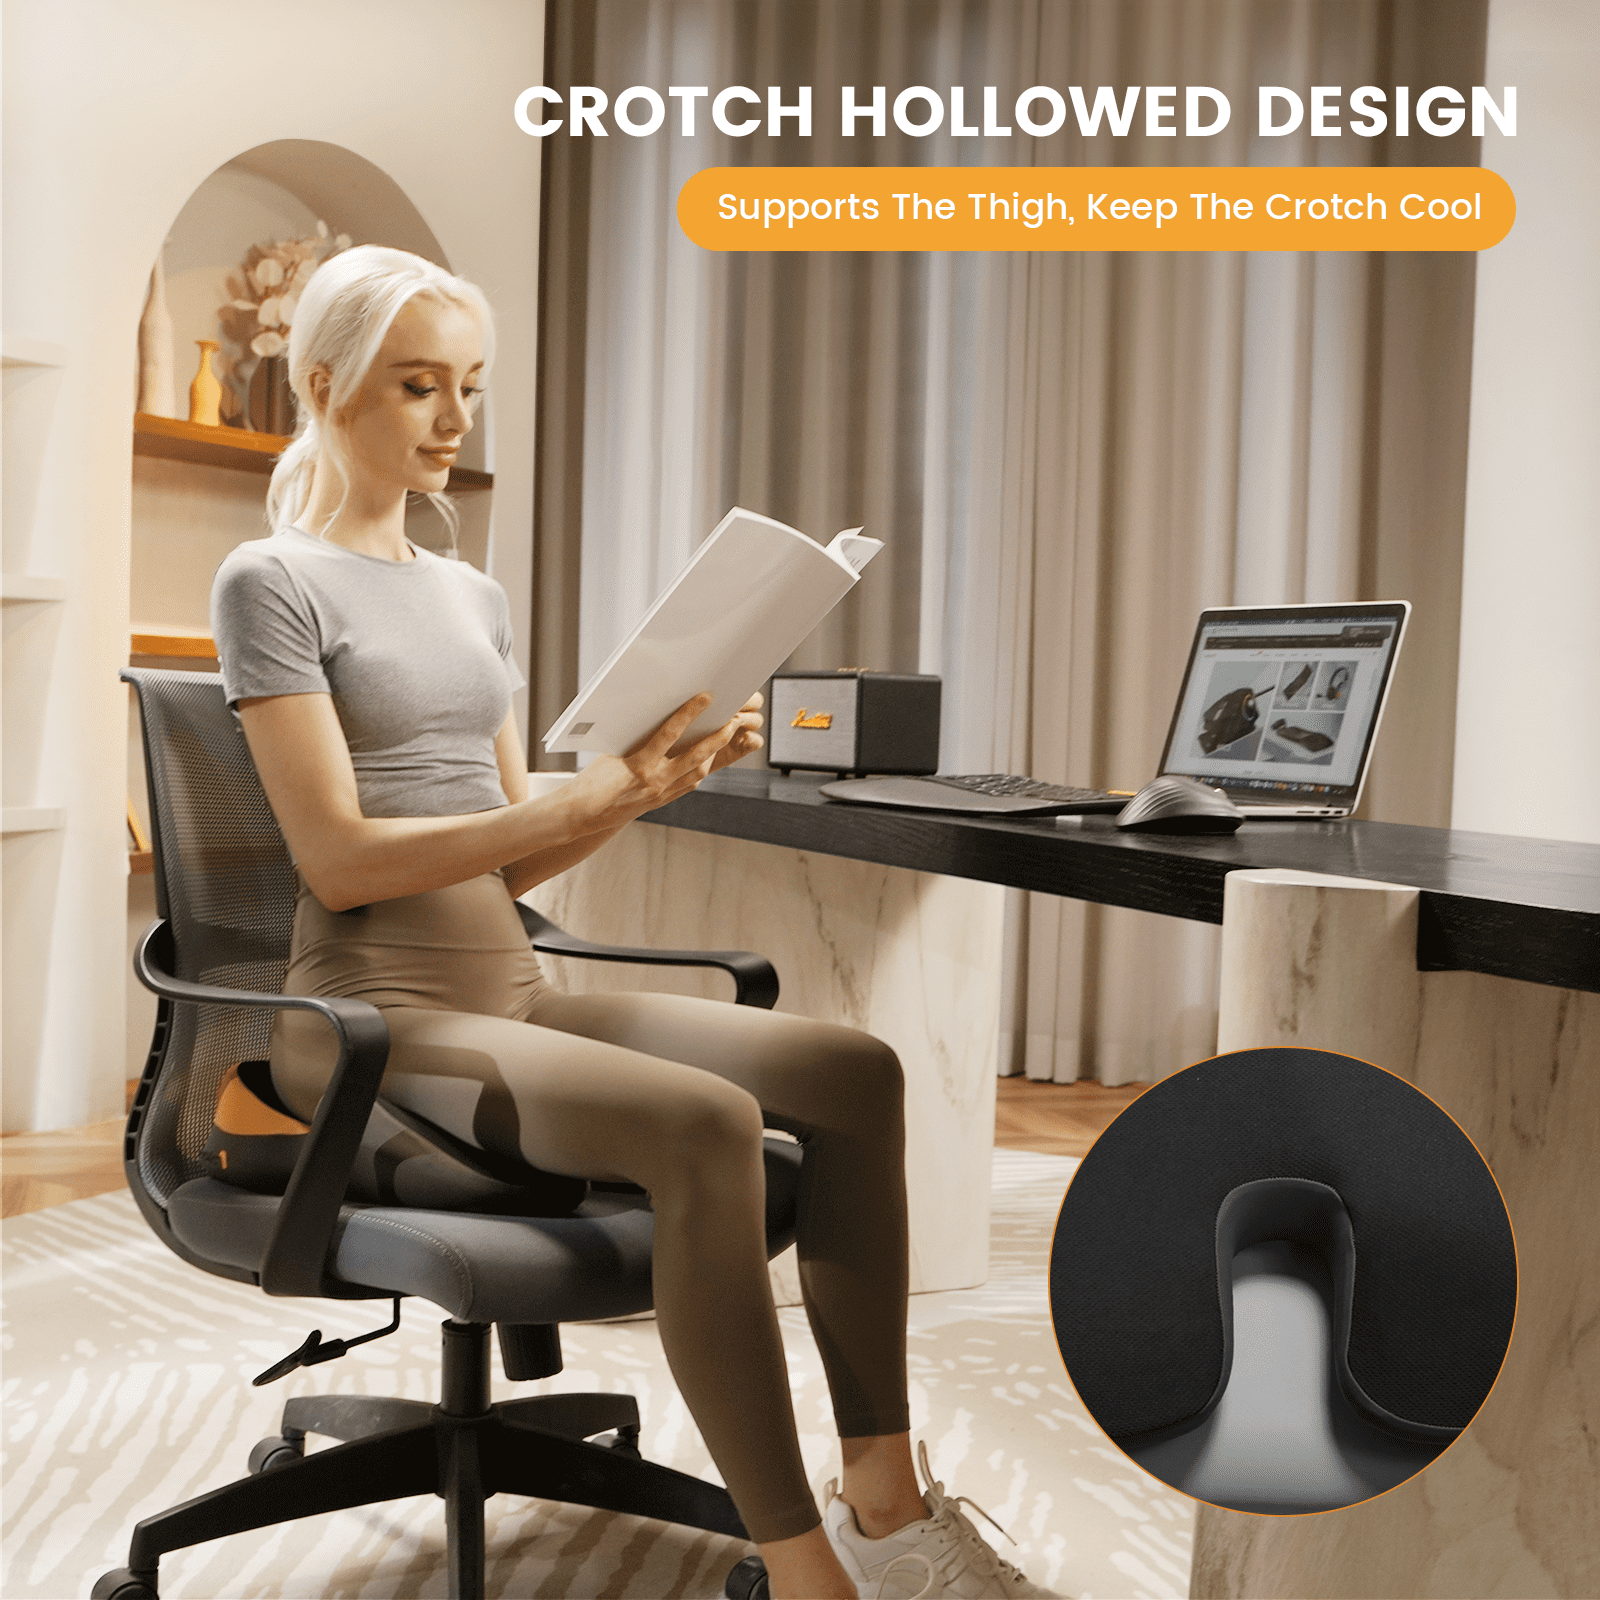 DYMGFZD Office Chair Cushions for Back and Butt, Ergonomic Chair/Seat  Cushion for Long Sitting, Sitting Pillow for Automobile, Wheelchair,  Computer